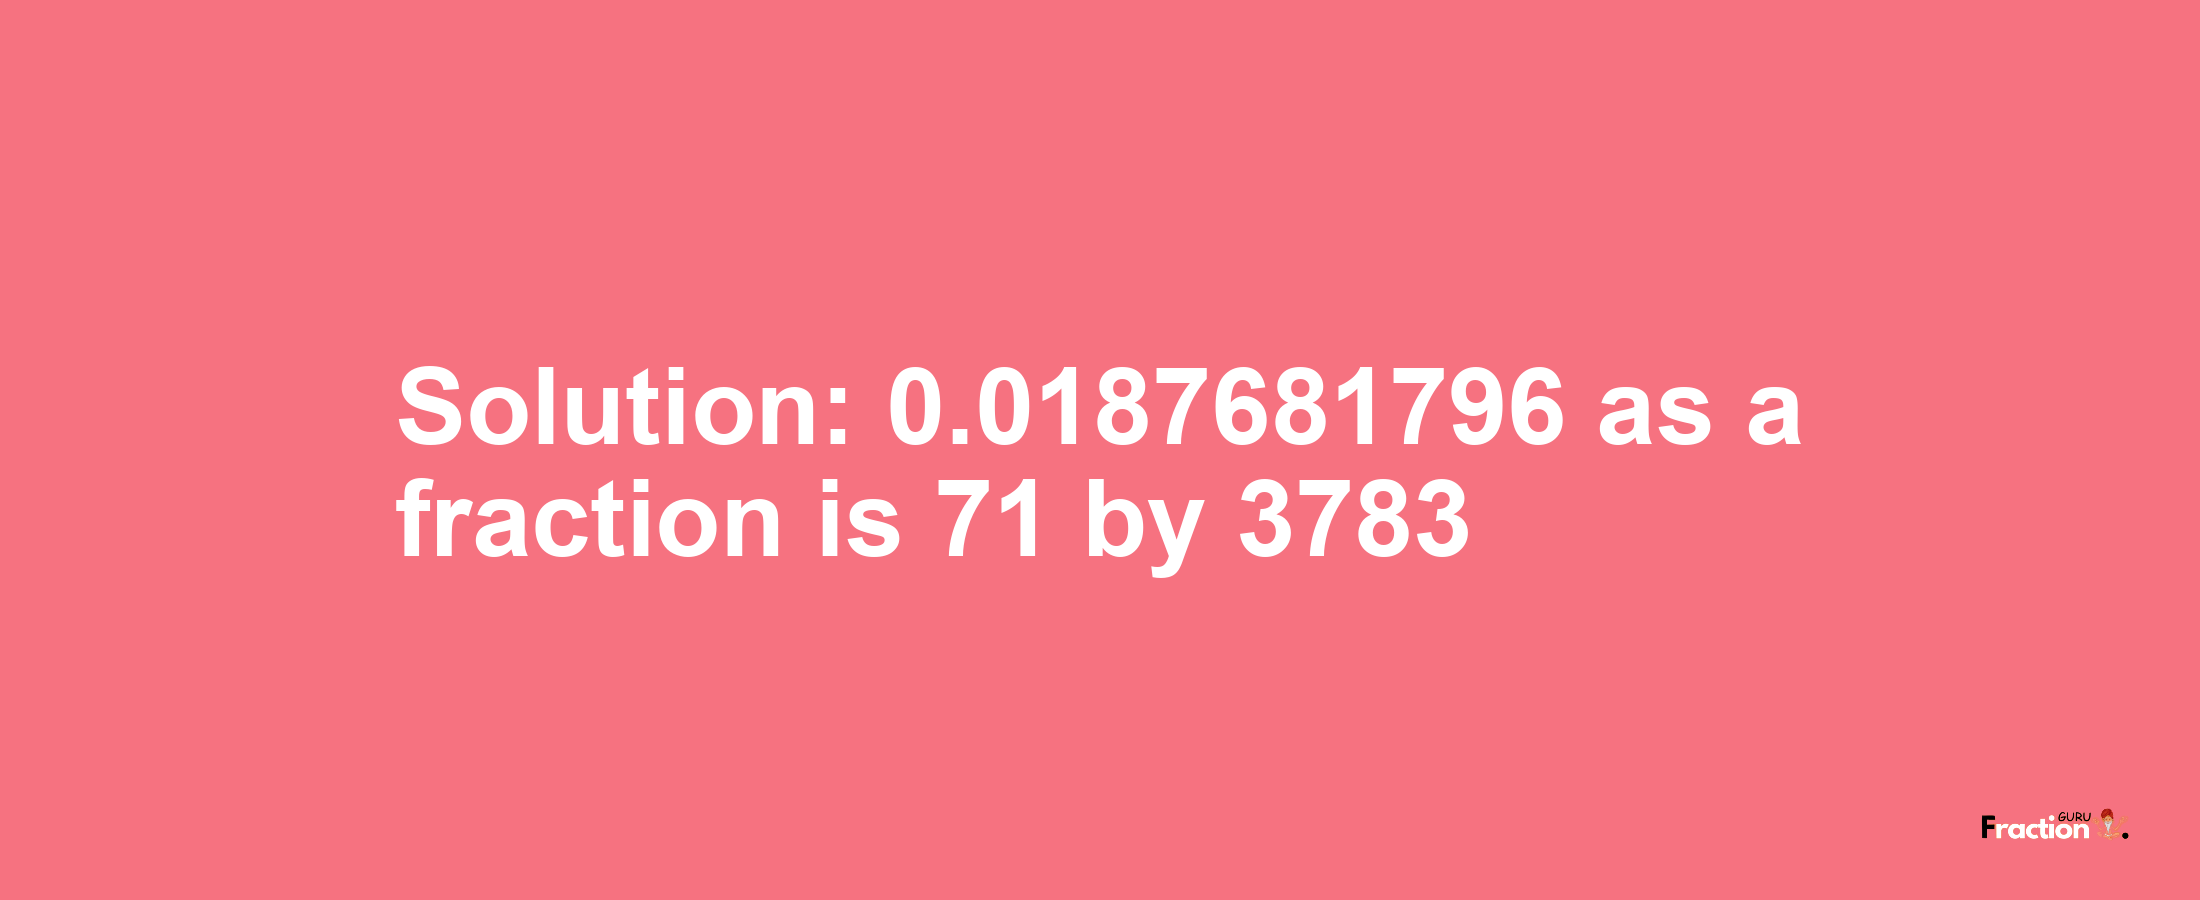 Solution:0.0187681796 as a fraction is 71/3783